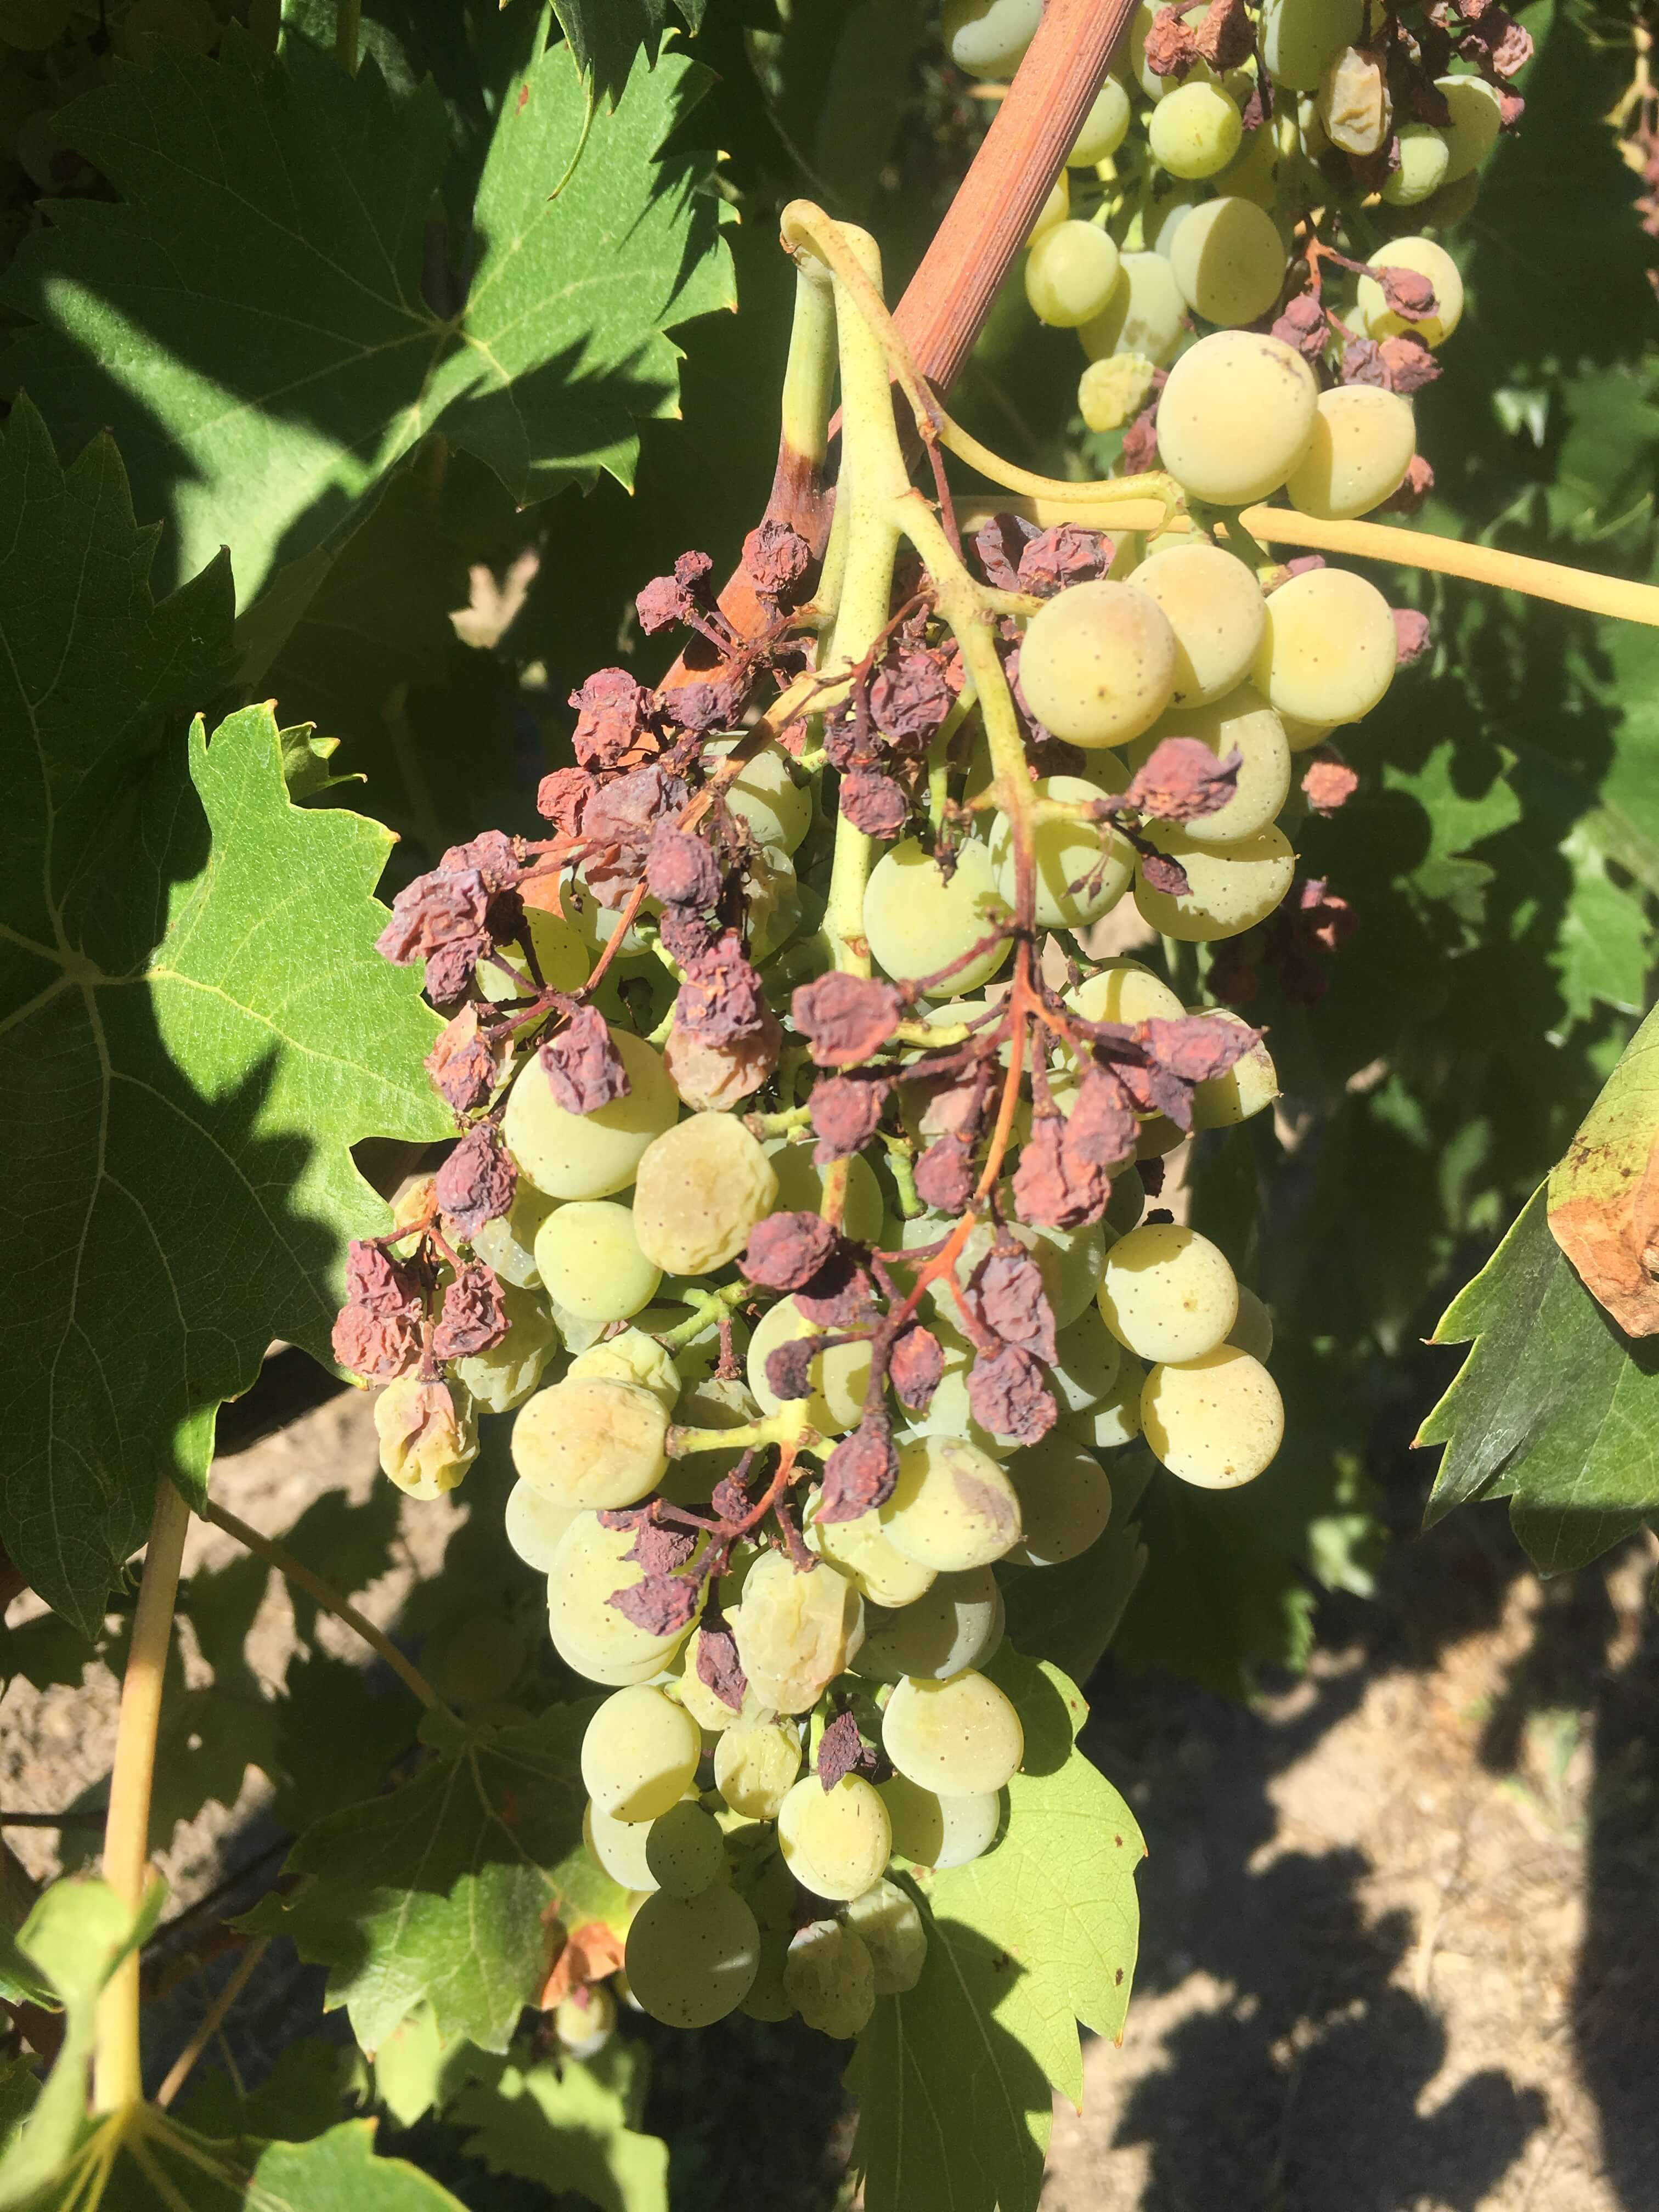 The extreme heat and dry climate this year may give Italian wine producers a reduction in grapes and wine this year. But perhaps it may lead to better wine?